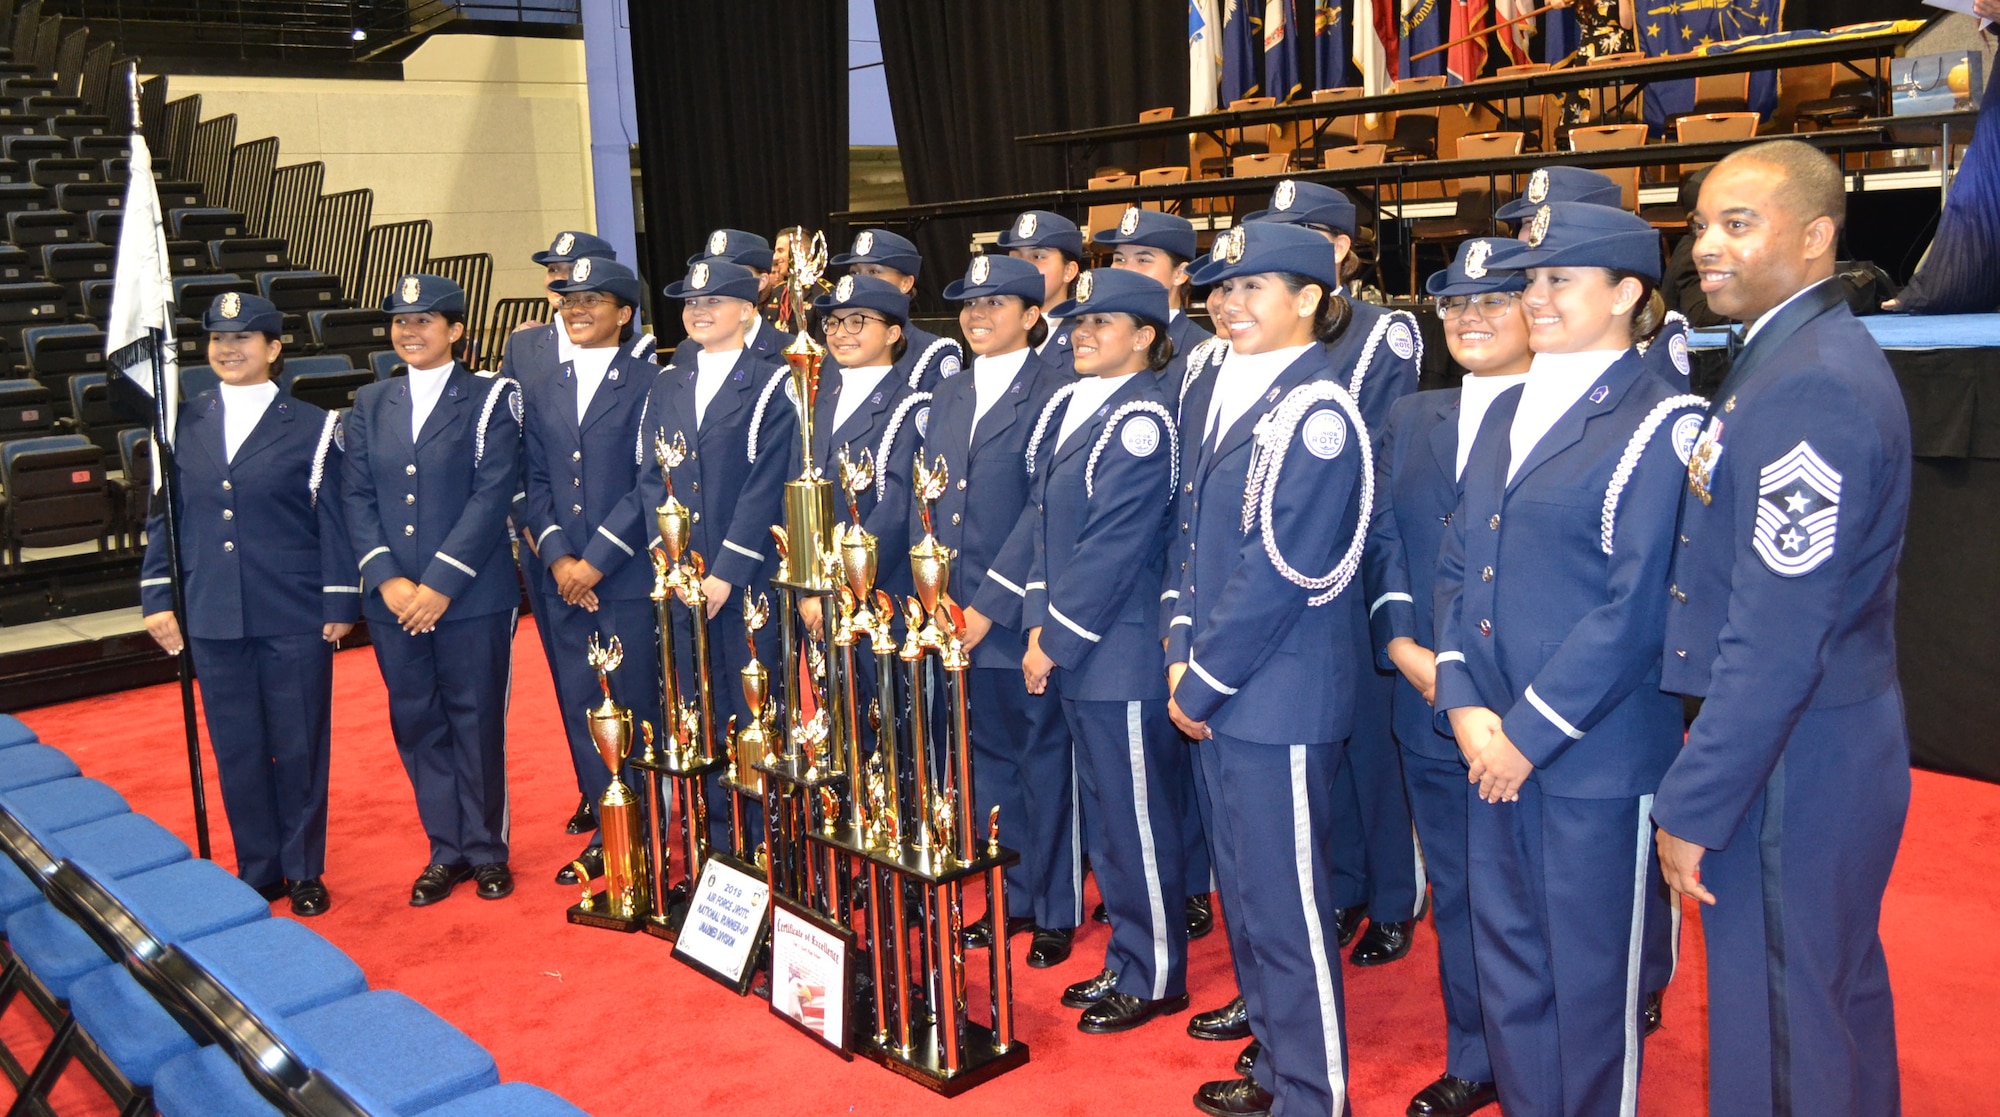 U.S. Air Force Chief Master Sgt. Jermaine Evans, Holm Center command chief, stands with the Silver Valor Air Force Junior Reserve Officer Training Corps cadets from Tom C. Clark High School, San Antonio, Texas, during the National High School Drill Team Competition May 3-5 2019, at Daytona Beach, Fla.  Silver Valor won trophies for five events and placed second overall in the unarmed competition.